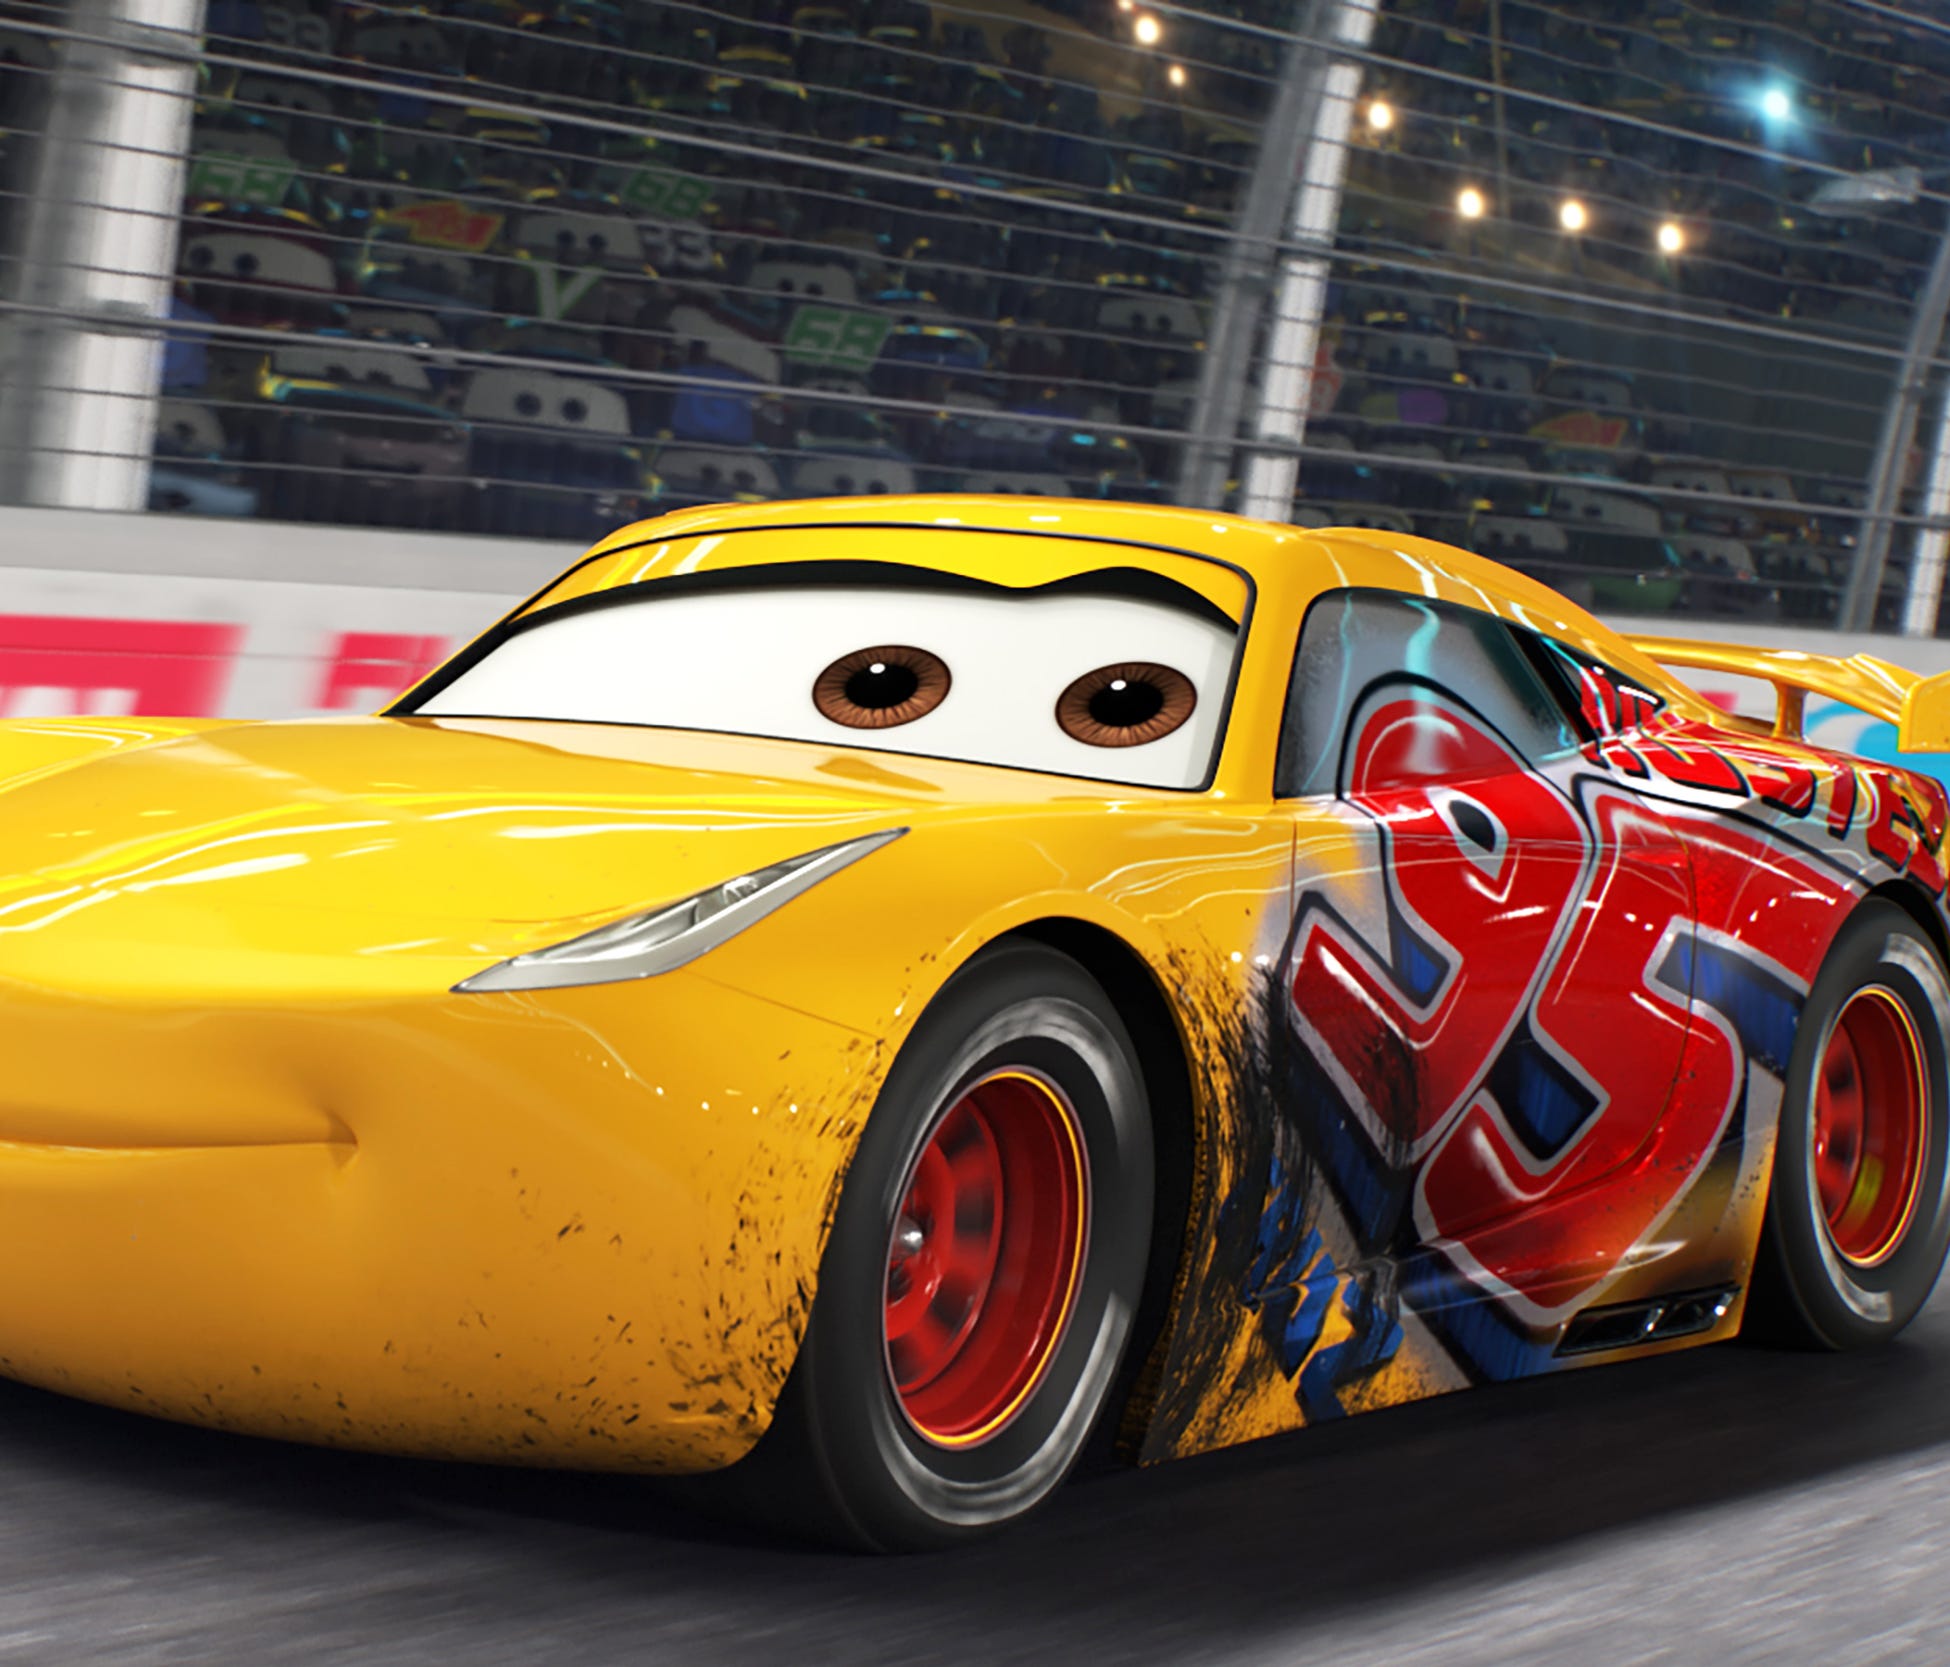 Cruz Ramirez (voiced by Cristela Alonzo) enters the Florida 500 wearing the No. 95 — the number of her new crew chief, Lightning McQueen.